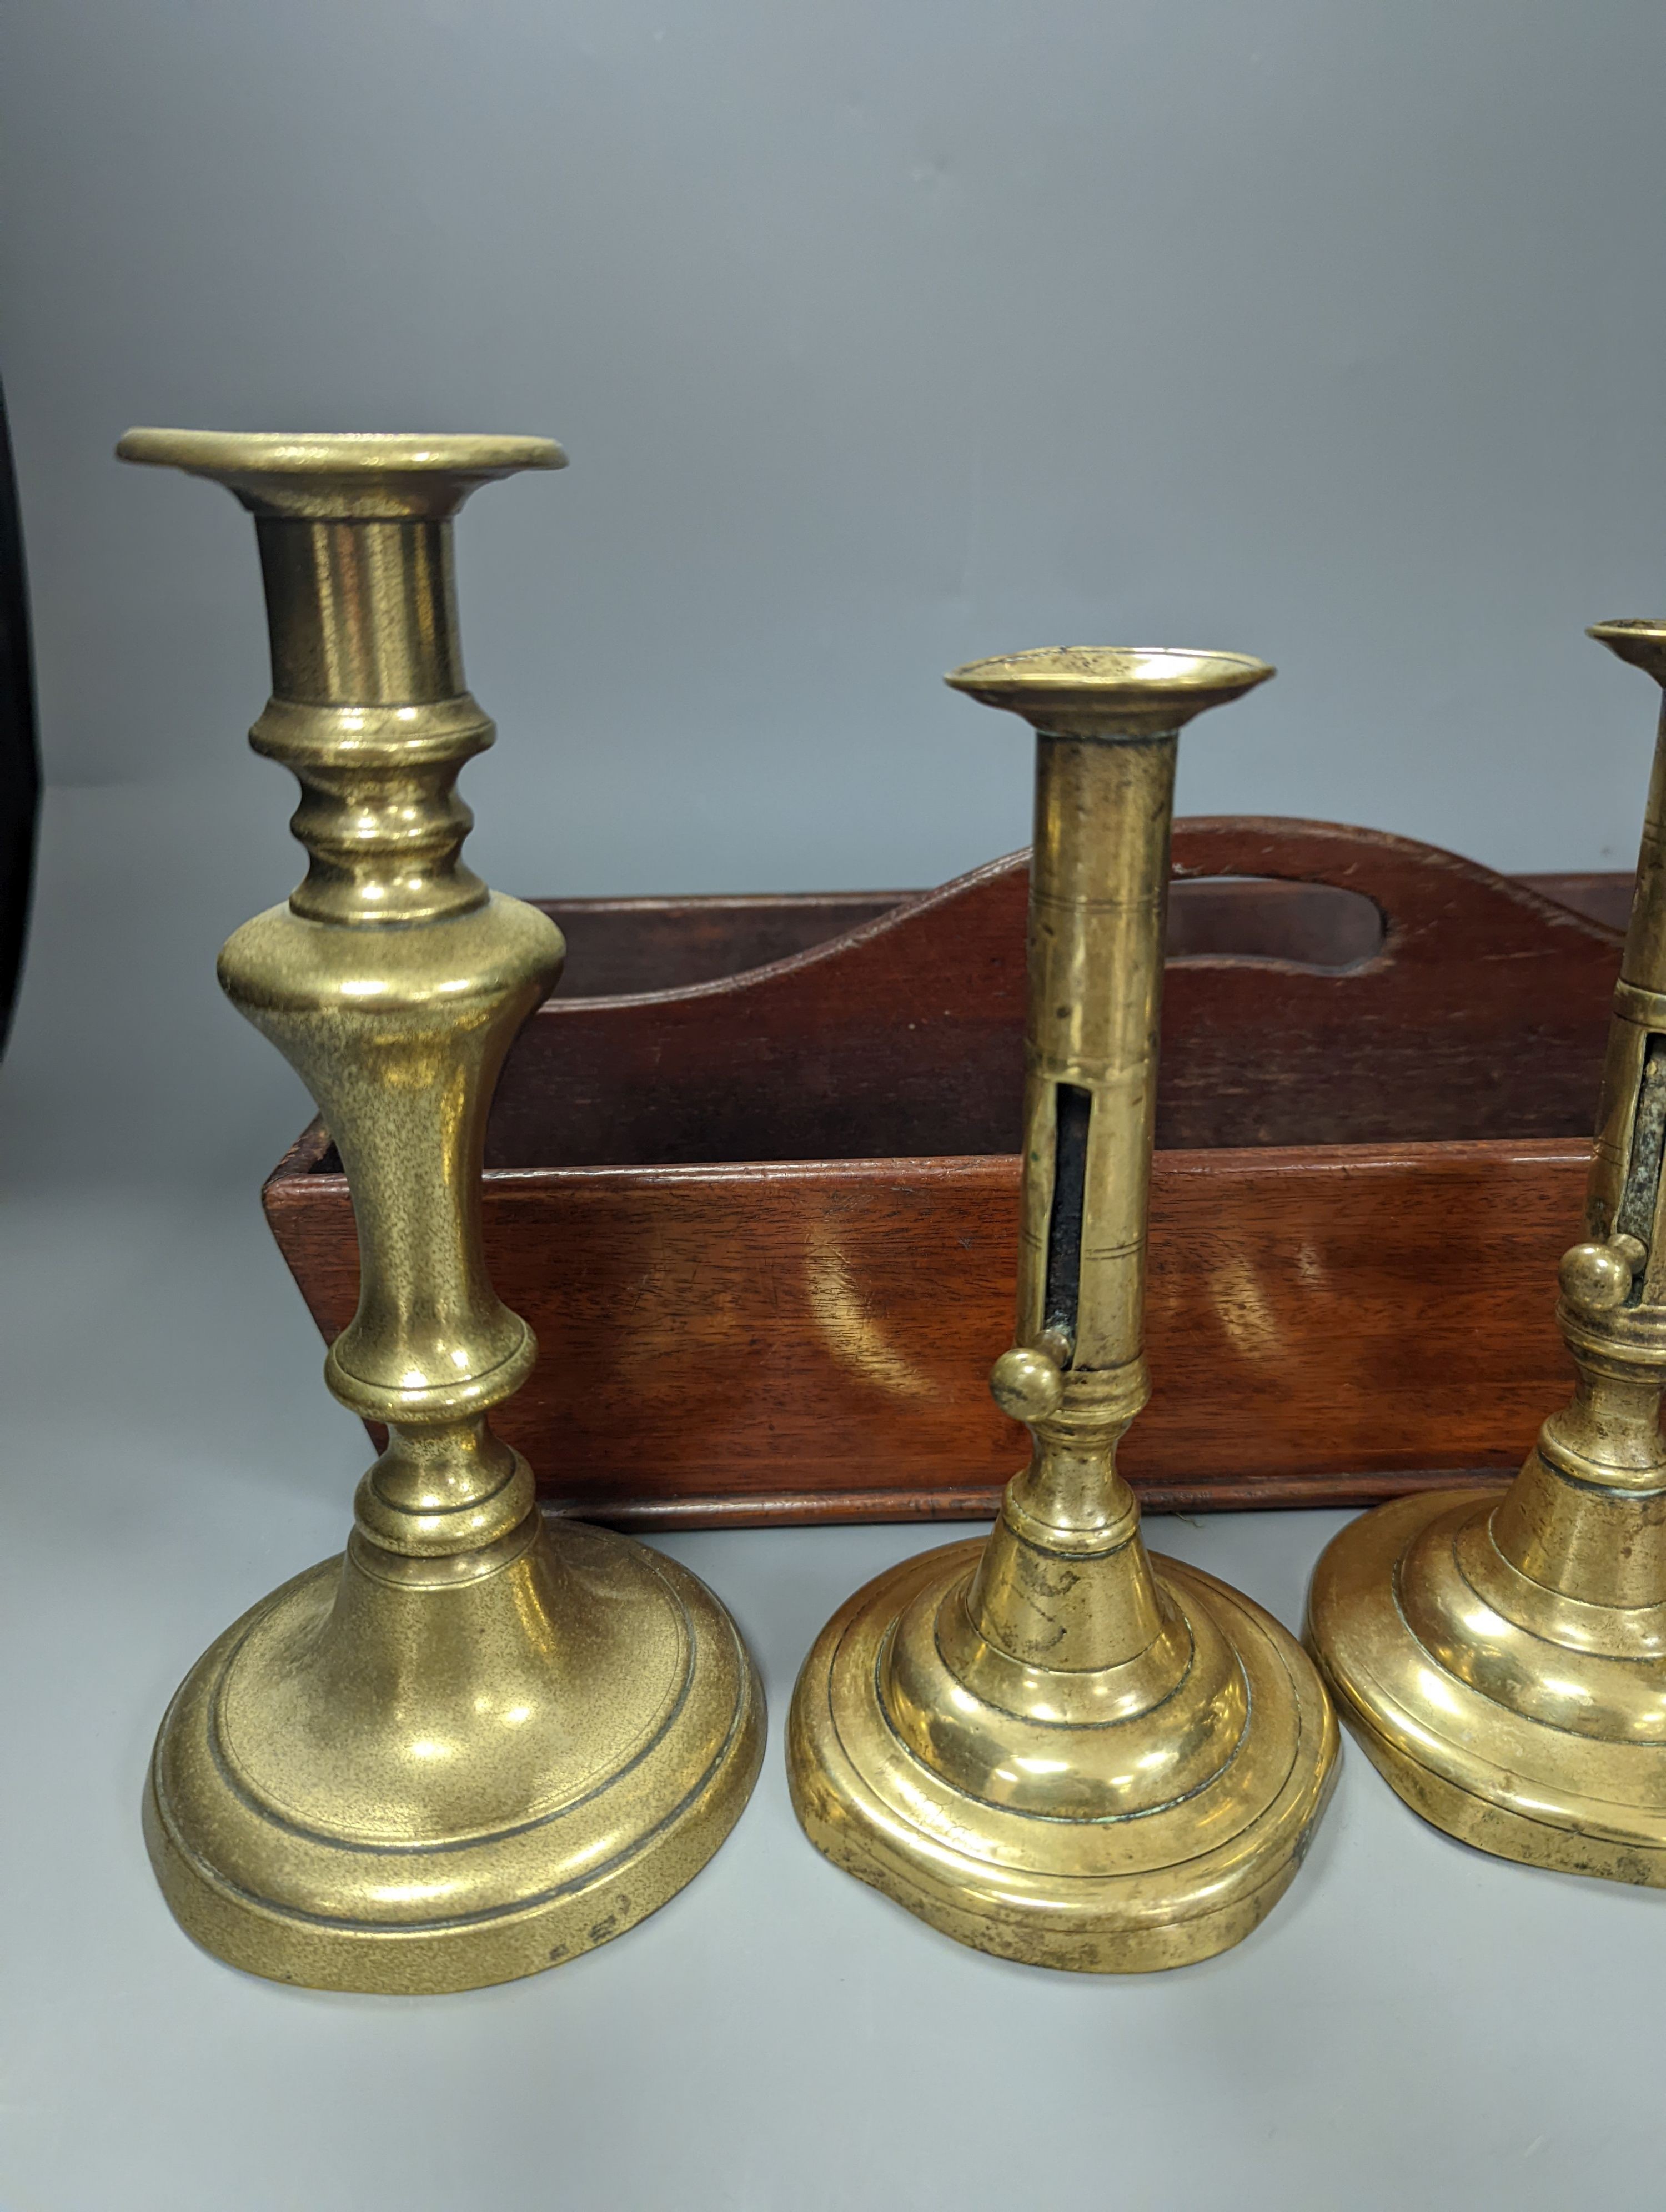 A pair of brass push-ejector candlesticks, a pair of Victorian brass candlesticks and a Victorian mahogany knife box, Knife box 38 cms wide.